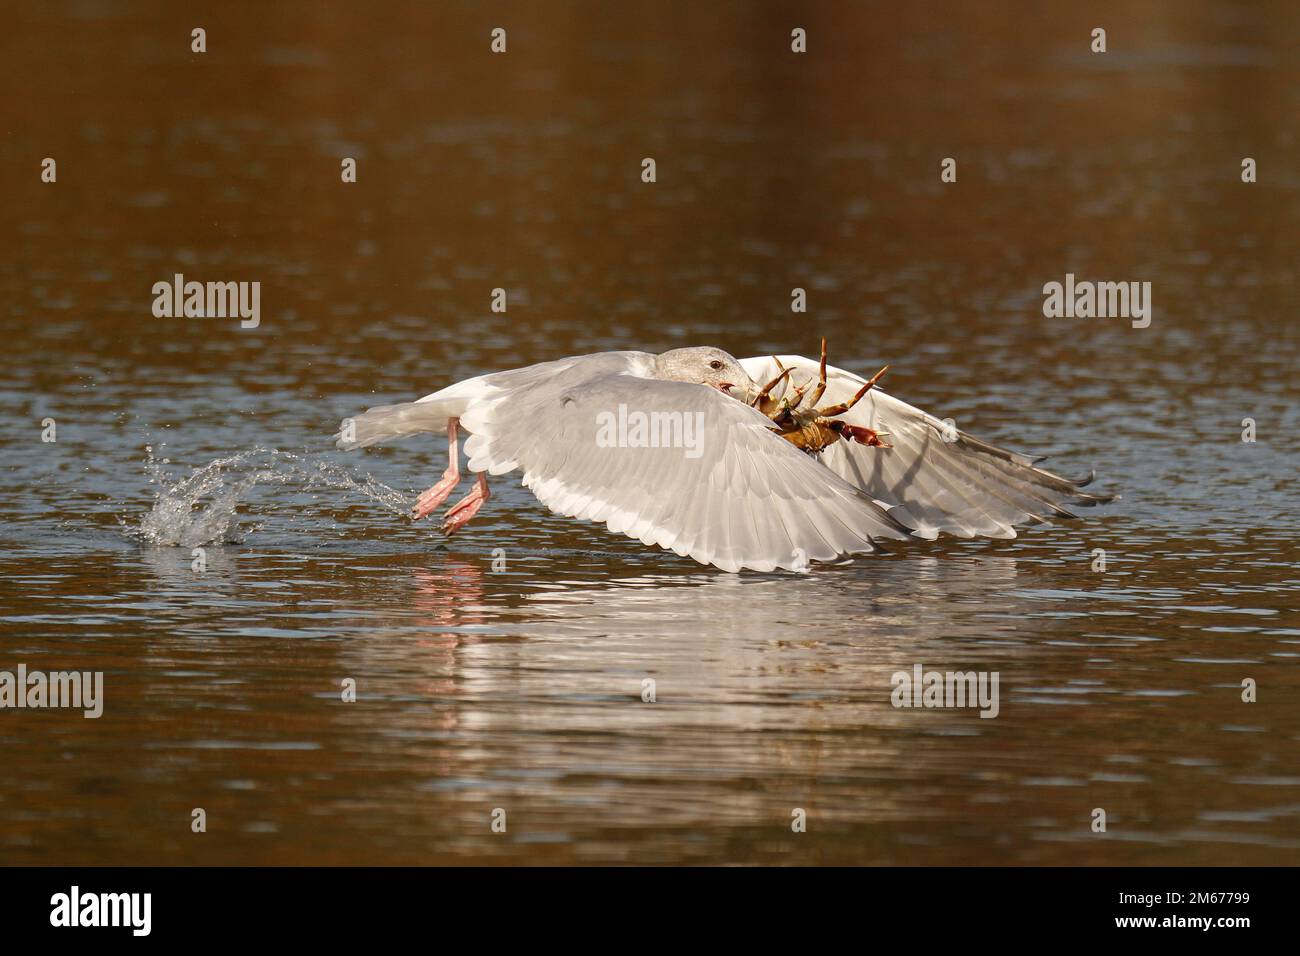 A Glaucous-winged Gull (Larus glaucescens) lifting off and flying from the water's surface with a crab caught in its beak. Taken in Victoria, BC, Cana Stock Photo